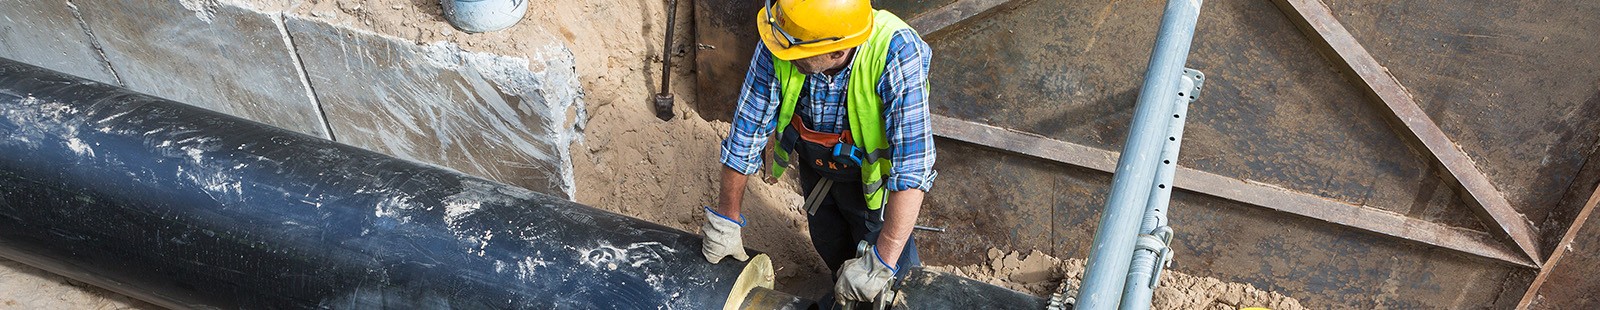 Sewer line safety for contractors